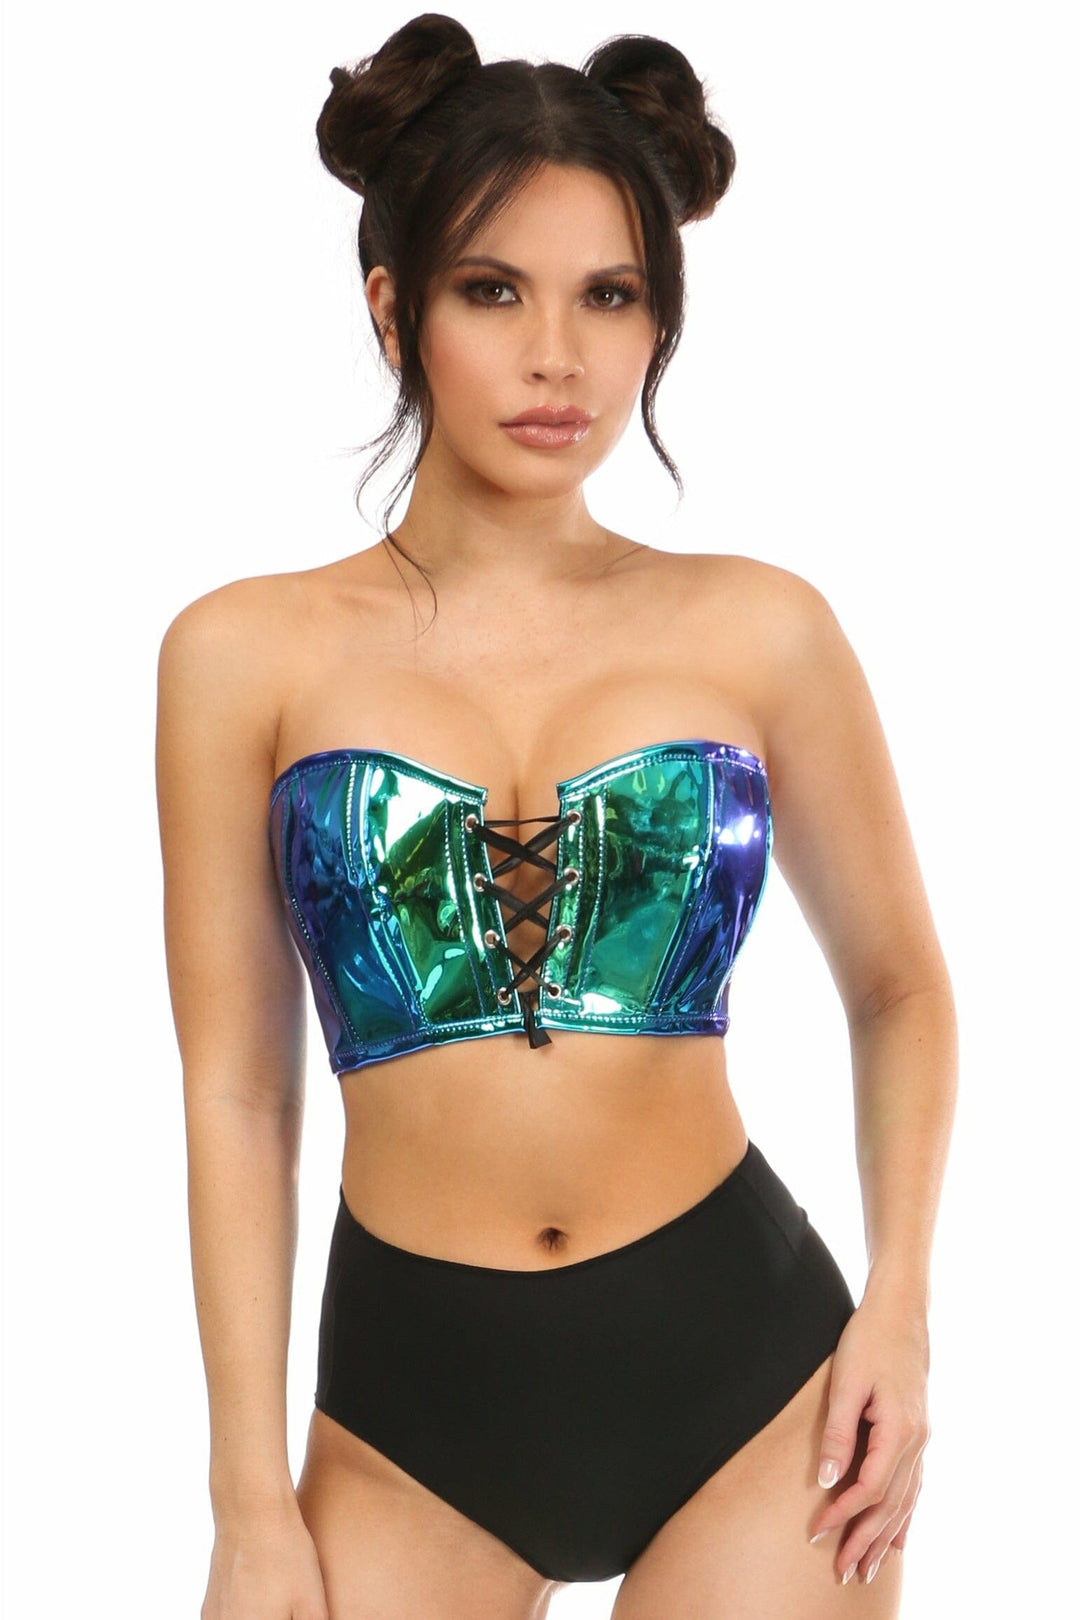 Lavish Teal/Blue Holo Lace-Up Short Bustier Top-Bustier Tops-Daisy Corsets-Hologram-S-SEXYSHOES.COM